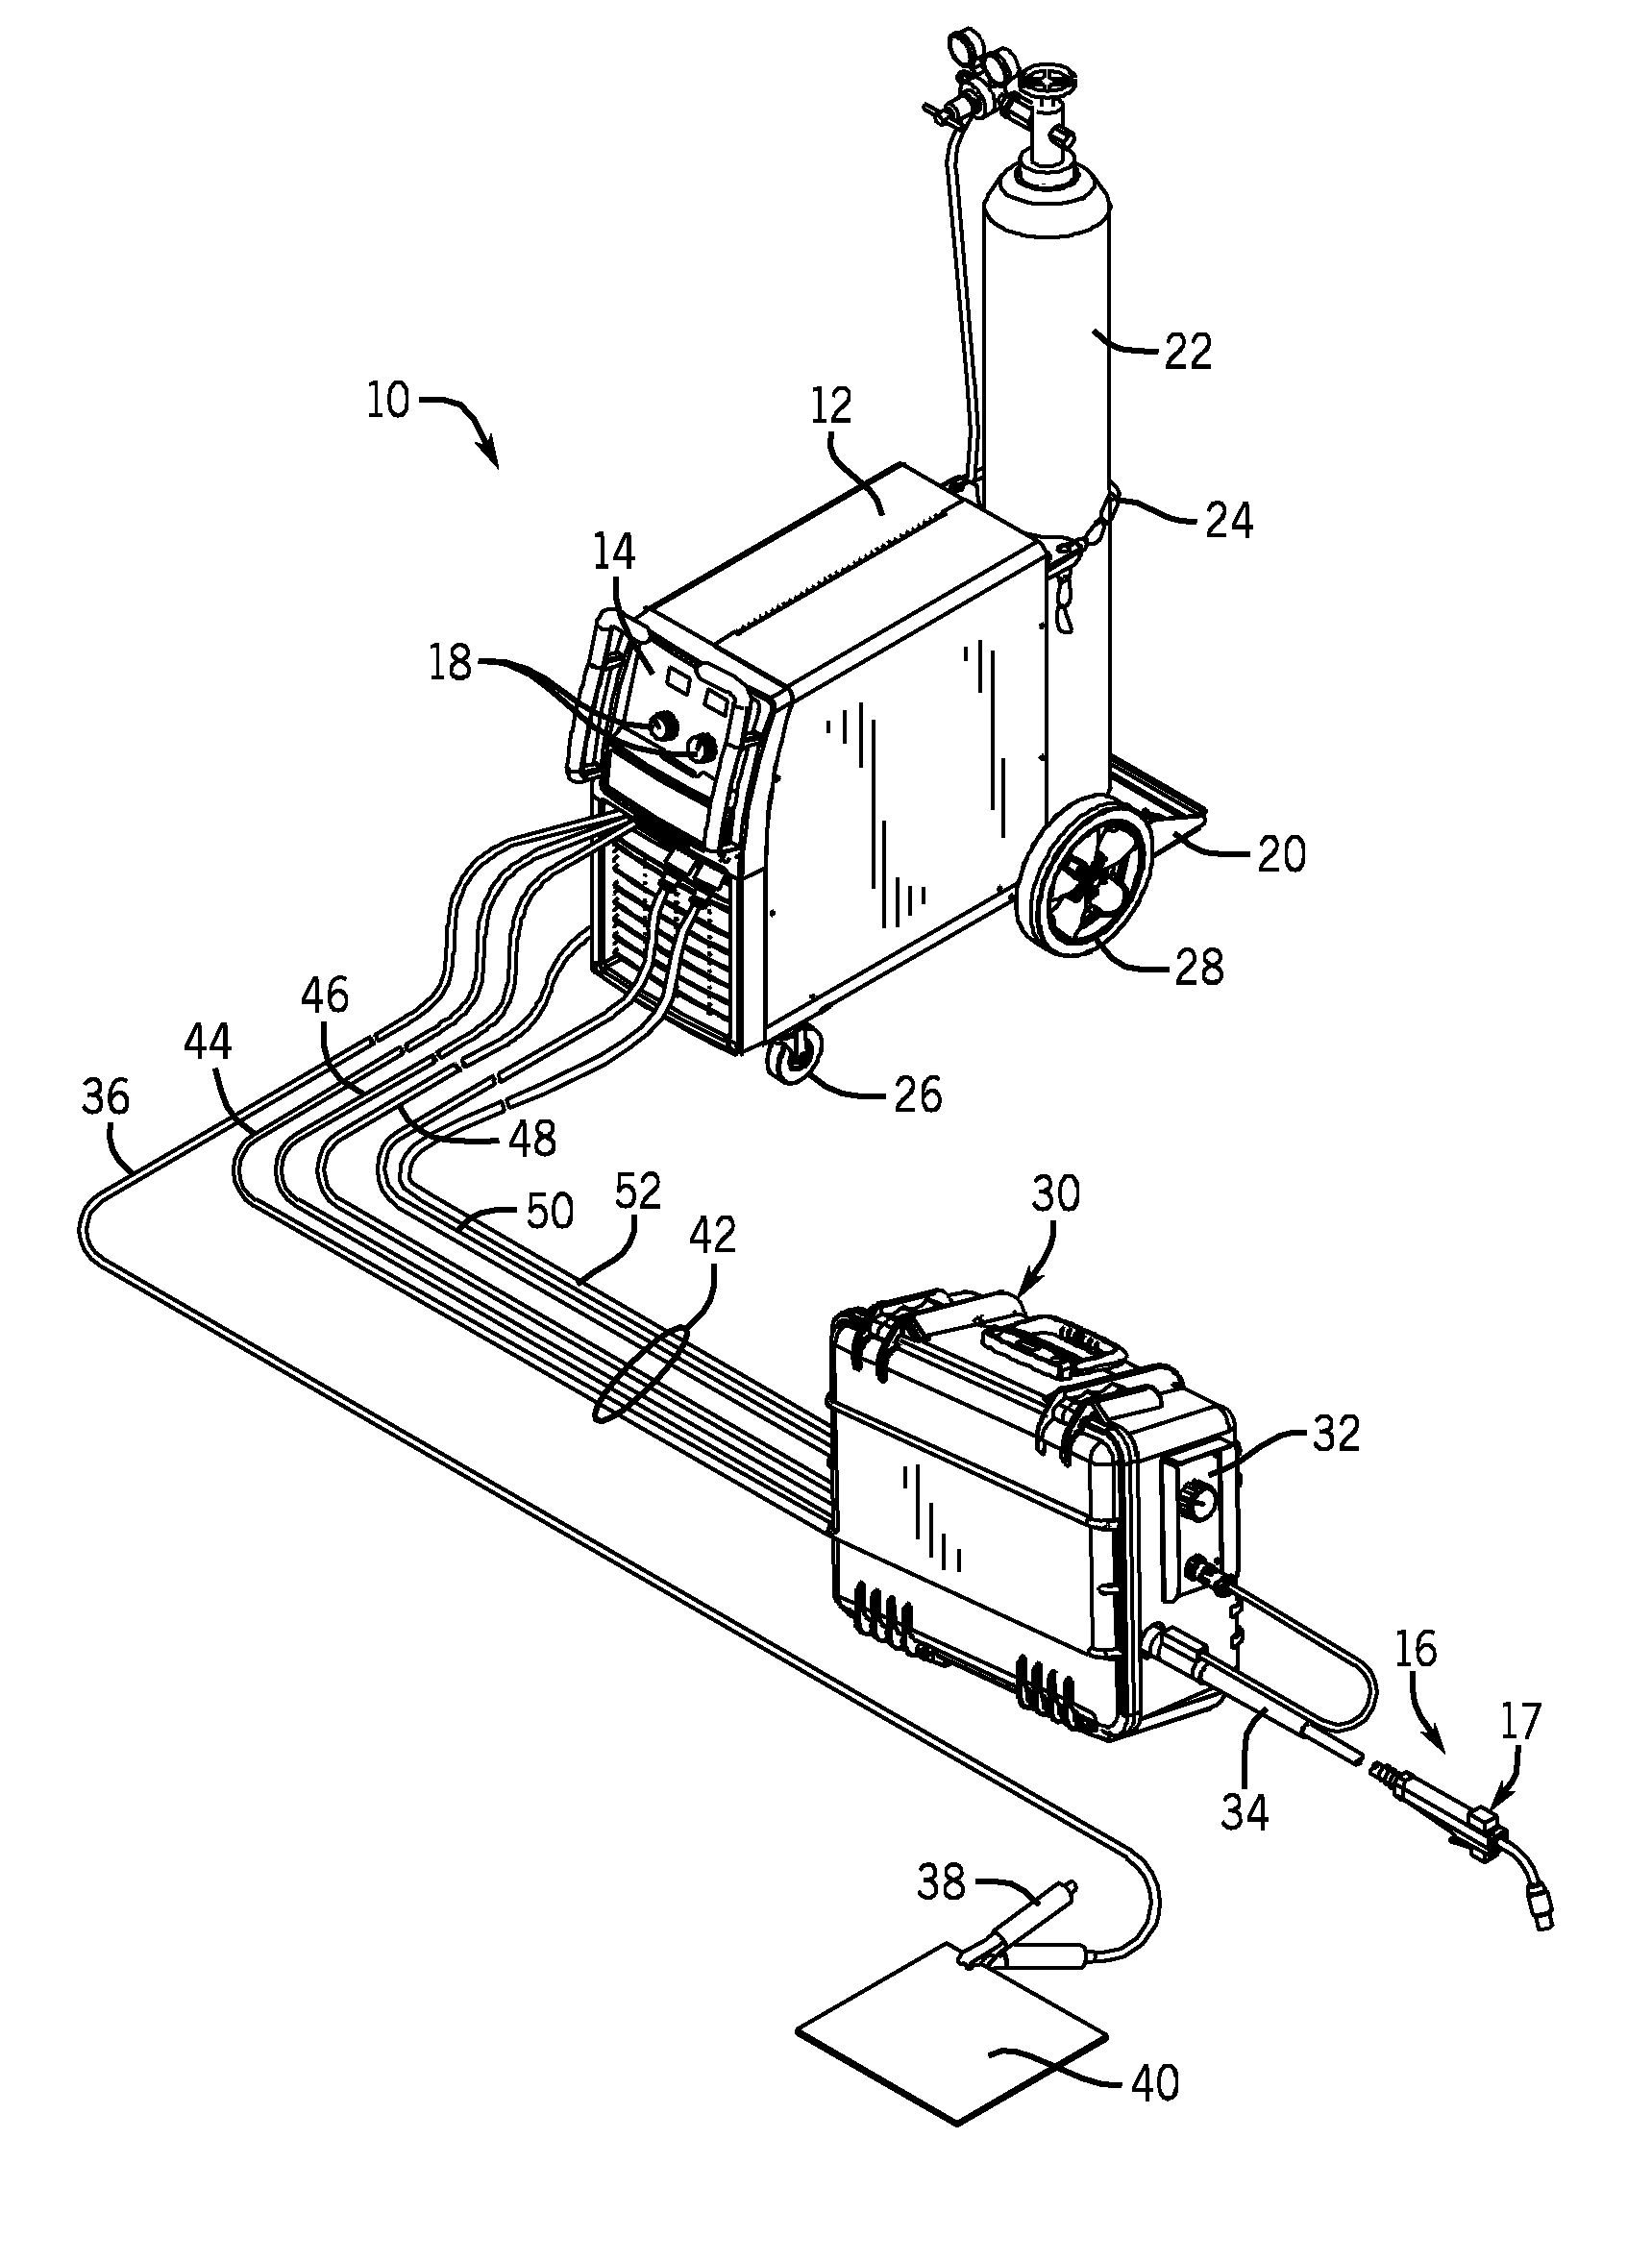 Welding device with integral user interface